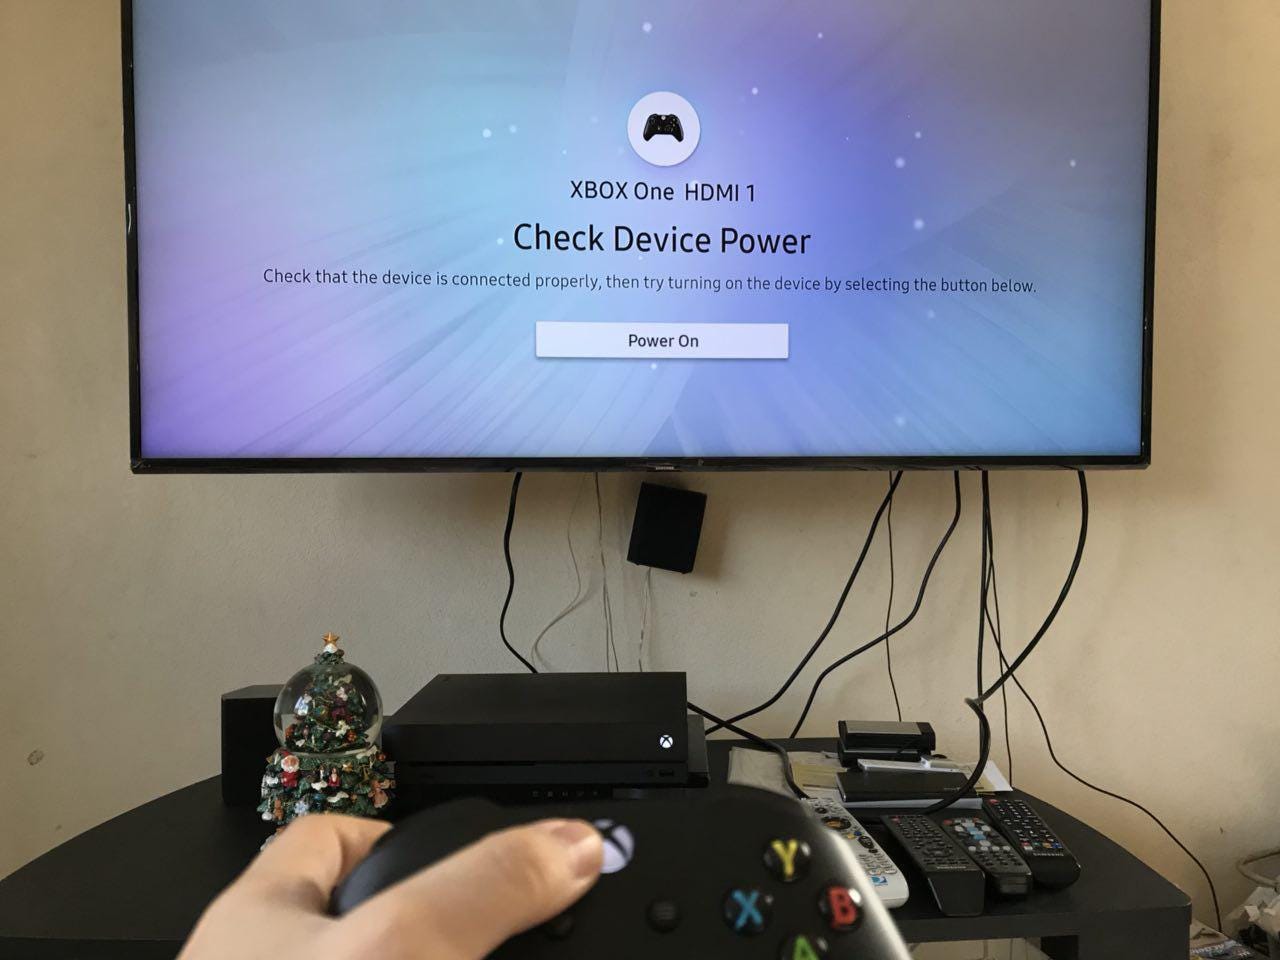 How to setup XBOX ONE X 🎮 with Samsung QLED 4K TV 📺🎄 | by CyberCode  Twins 👾 👾 | Medium